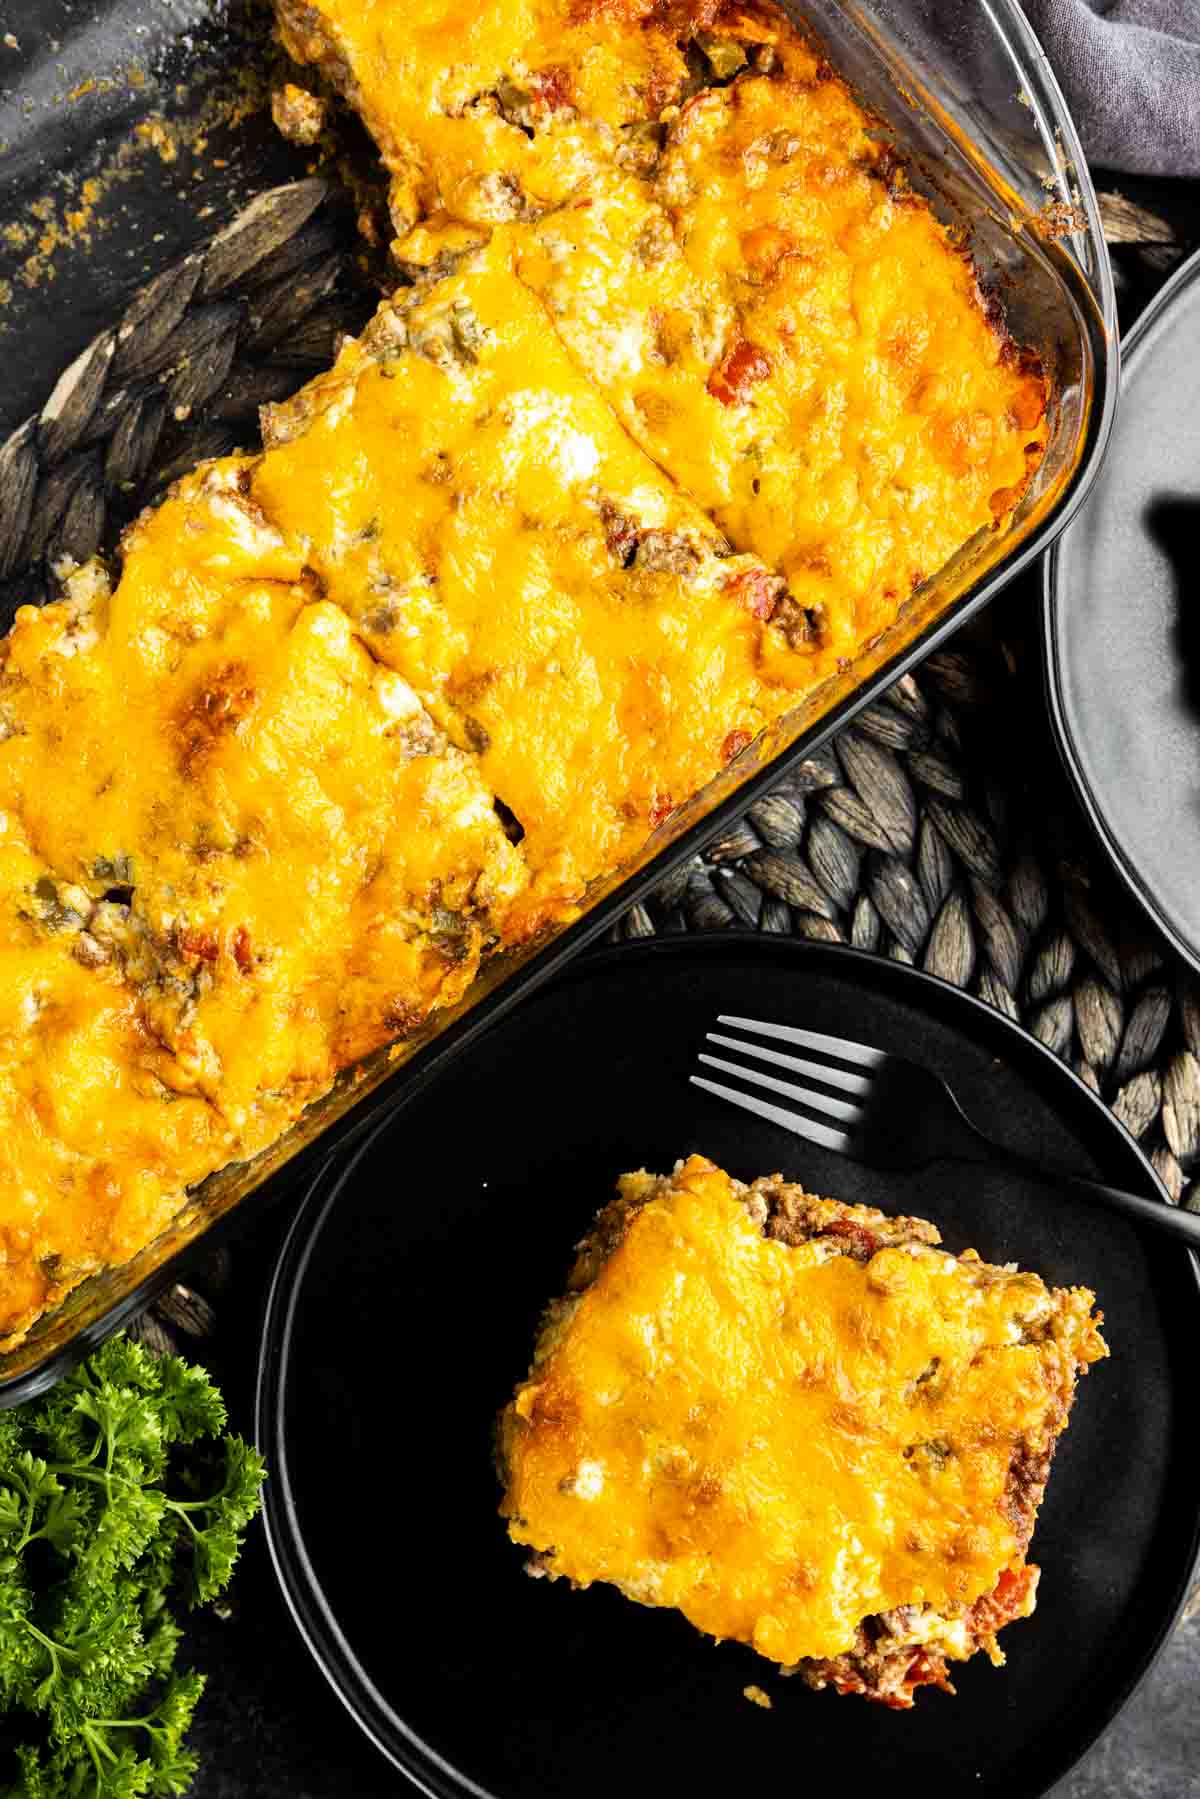 A casserole dish with a slice of John Wayne Casserole on a plate and a fork.